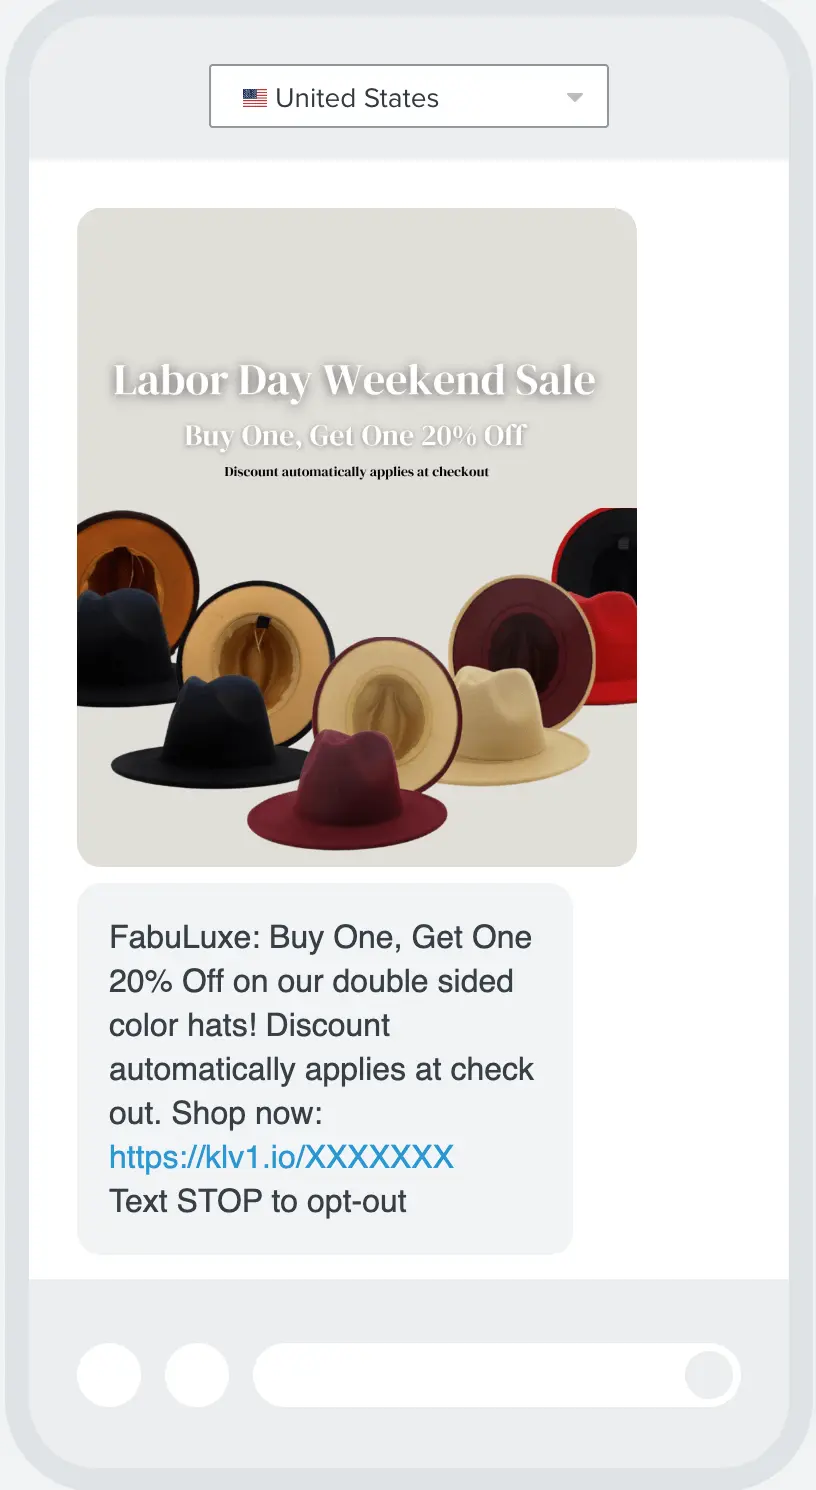 Image shows an MMS marketing message from Fabuluxe